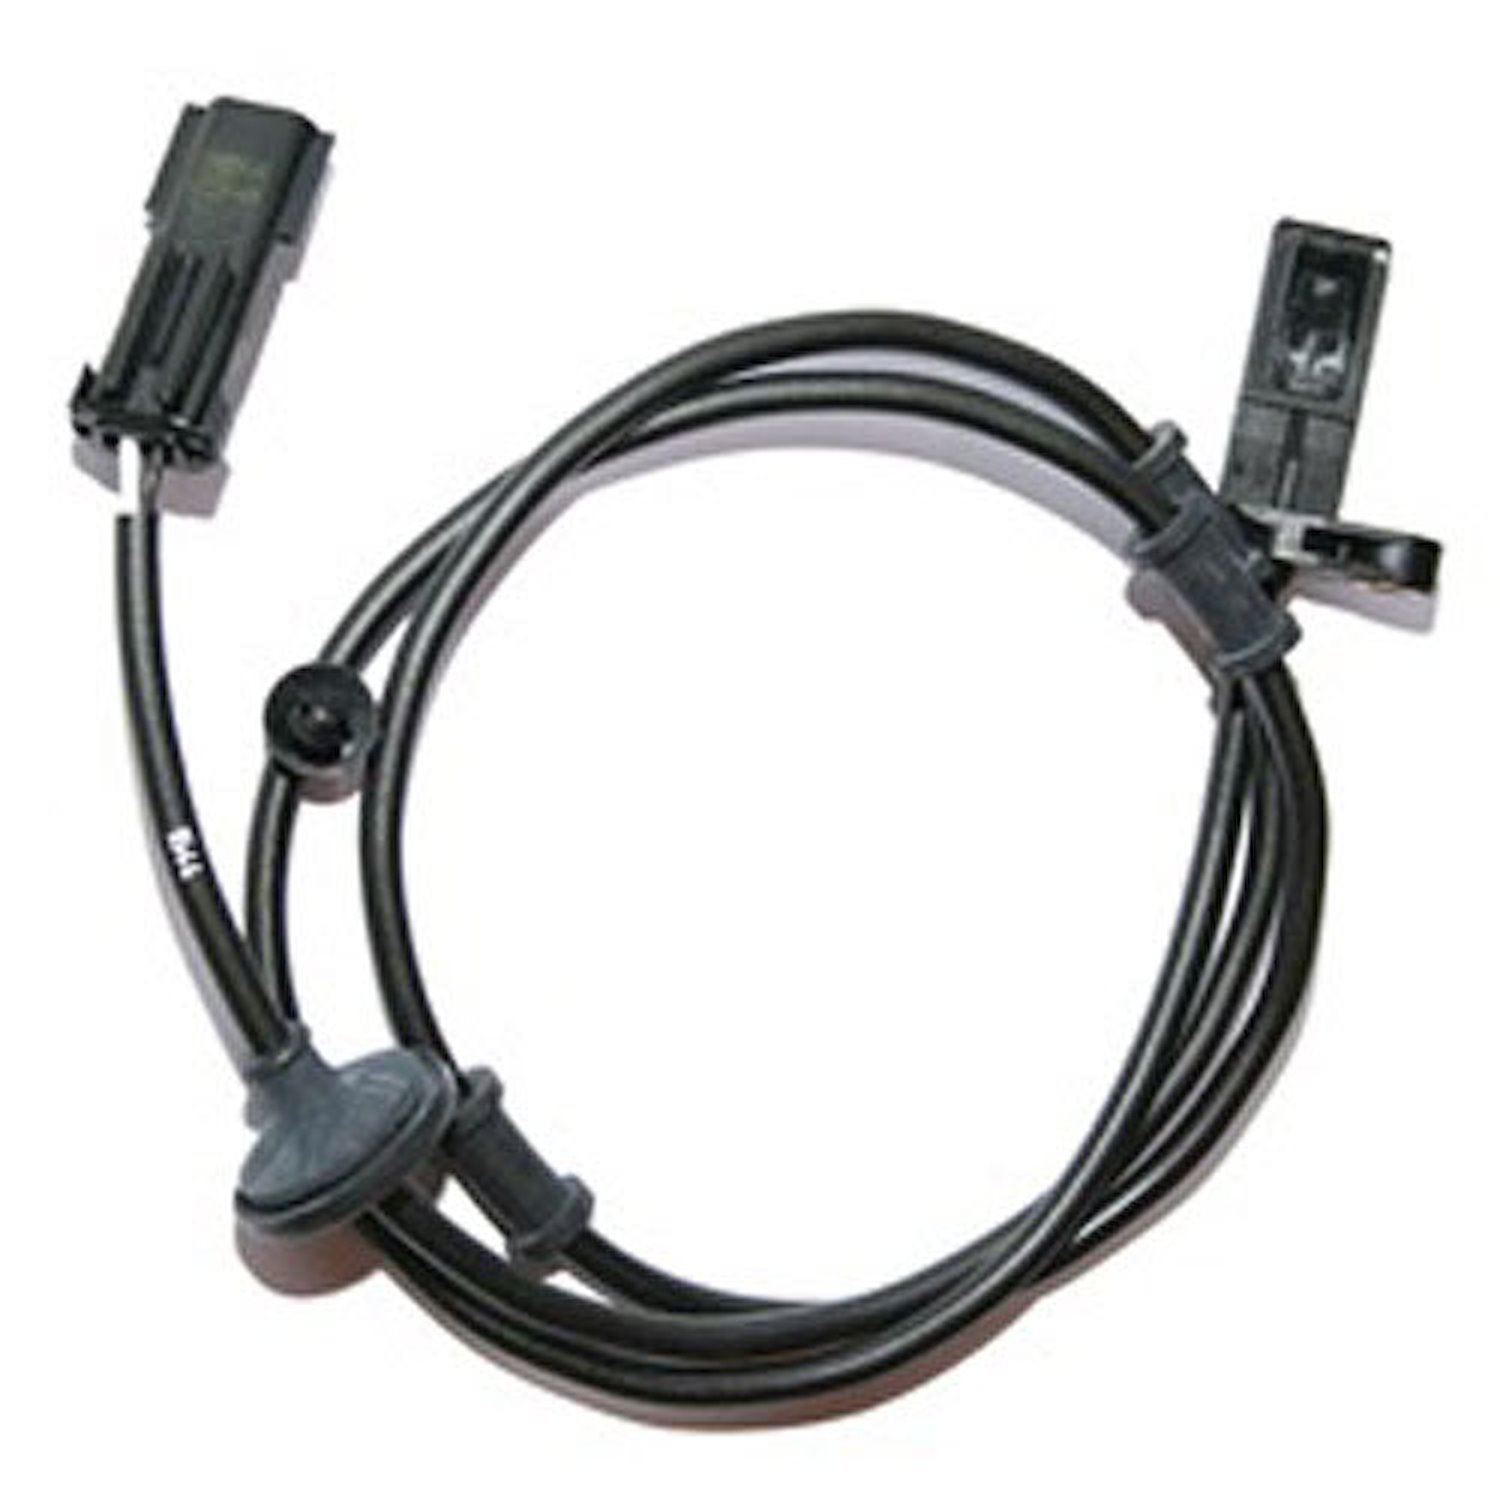 This rear ABS/Speed Sensor from Omix-ADA fits the left or right side on 07-12 Jeep Wranglers and 08-12 Libertys.